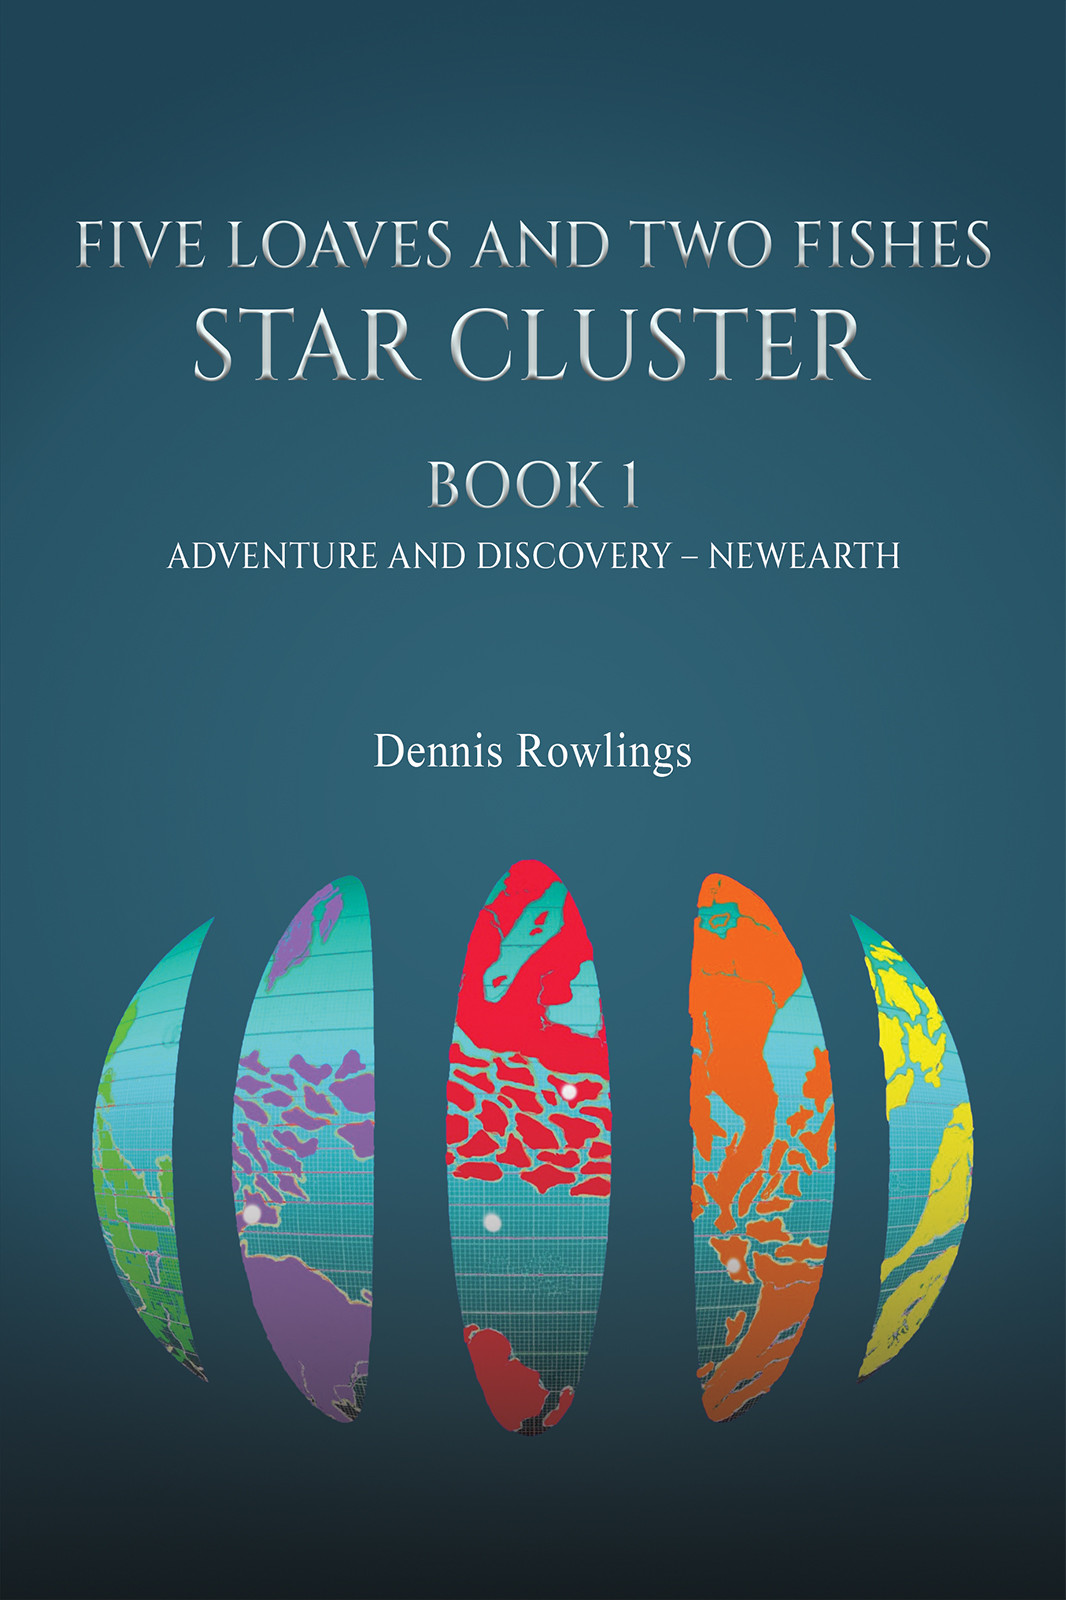 Five Loaves and Two Fishes – Star Cluster